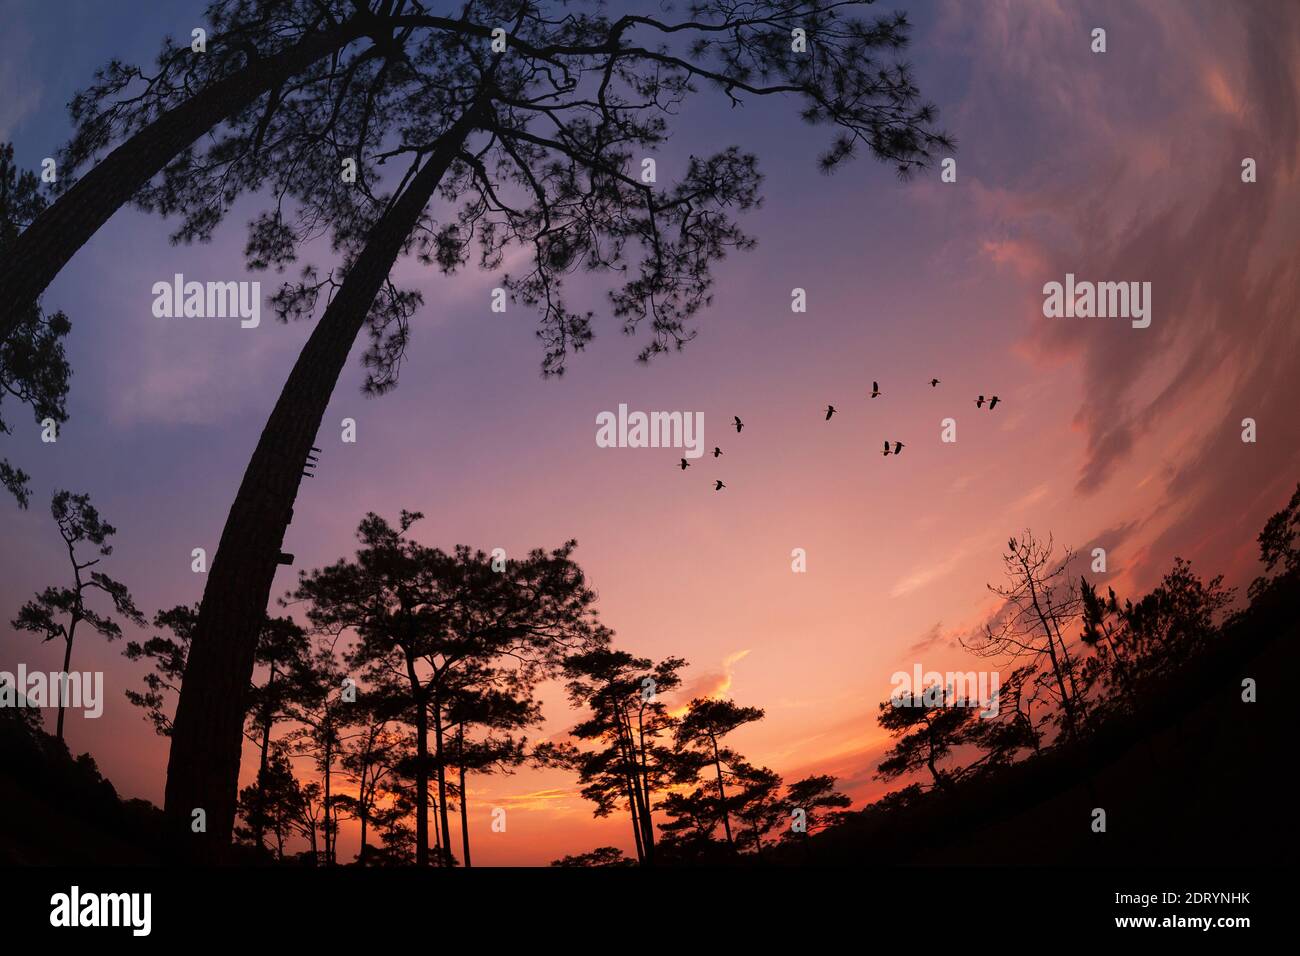 silhouette landscape pine forest with colorful sky and cloud with birds group Stock Photo